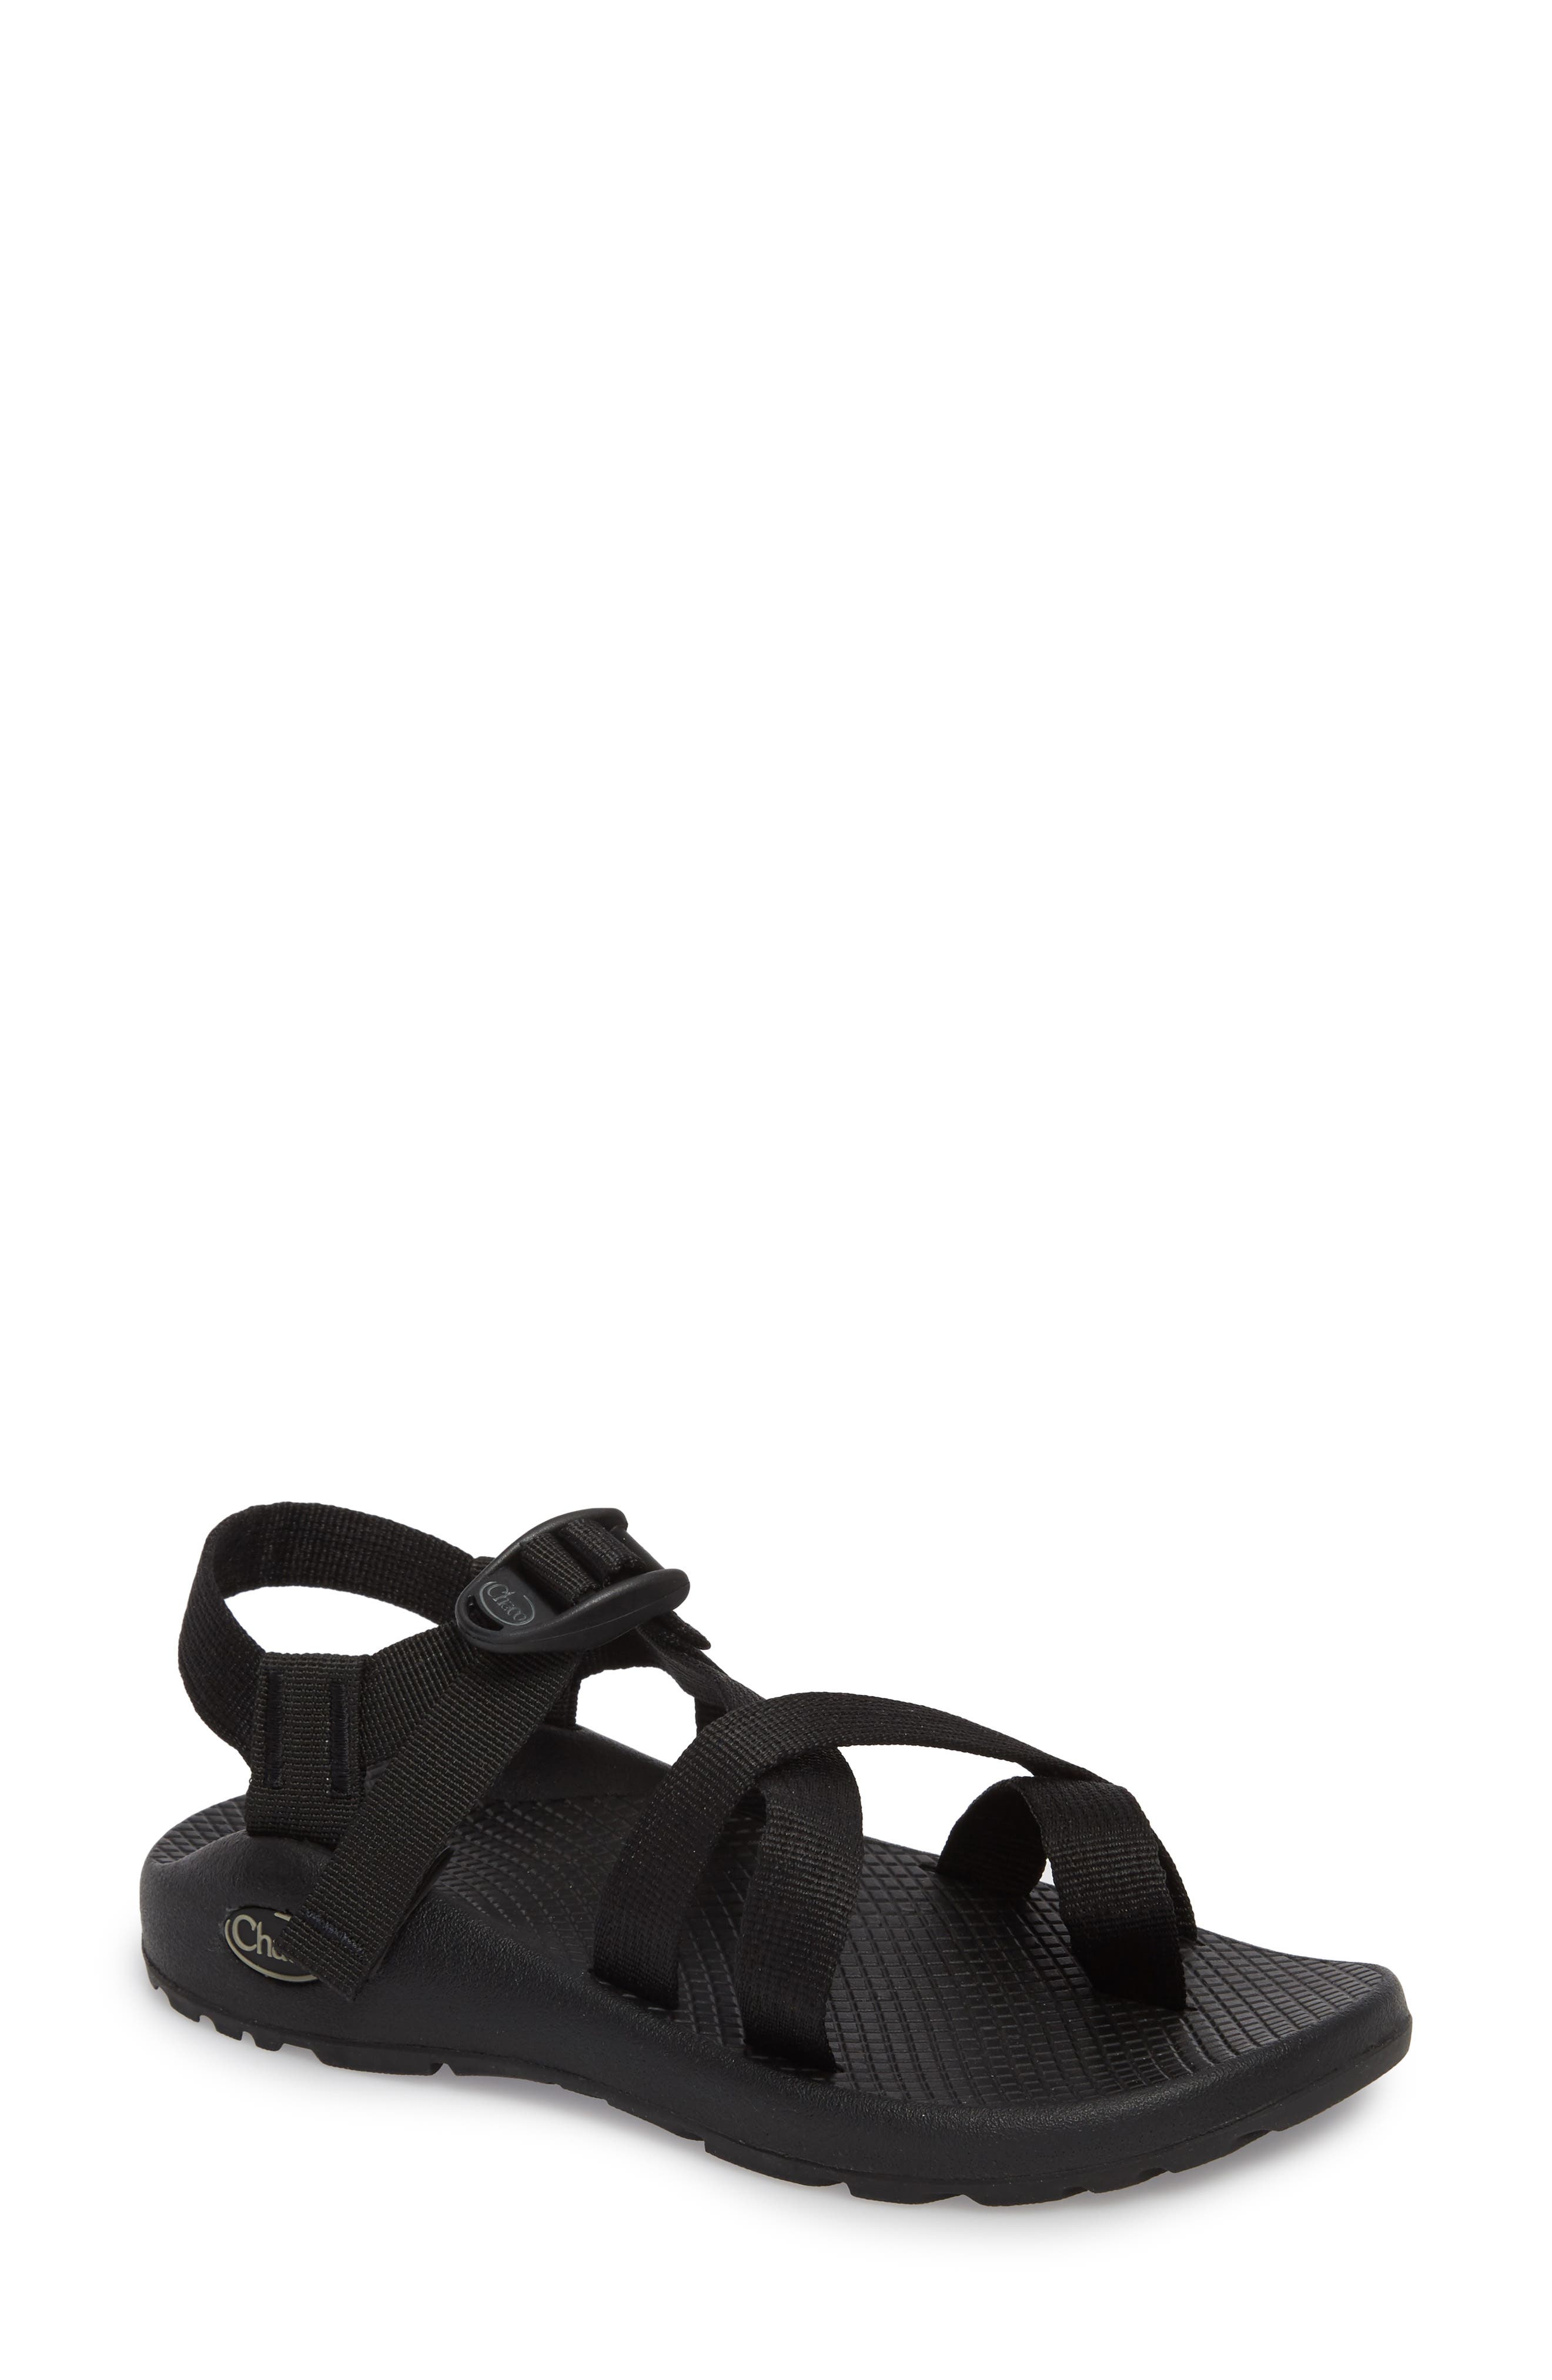 Women's Chaco Shoes | Nordstrom